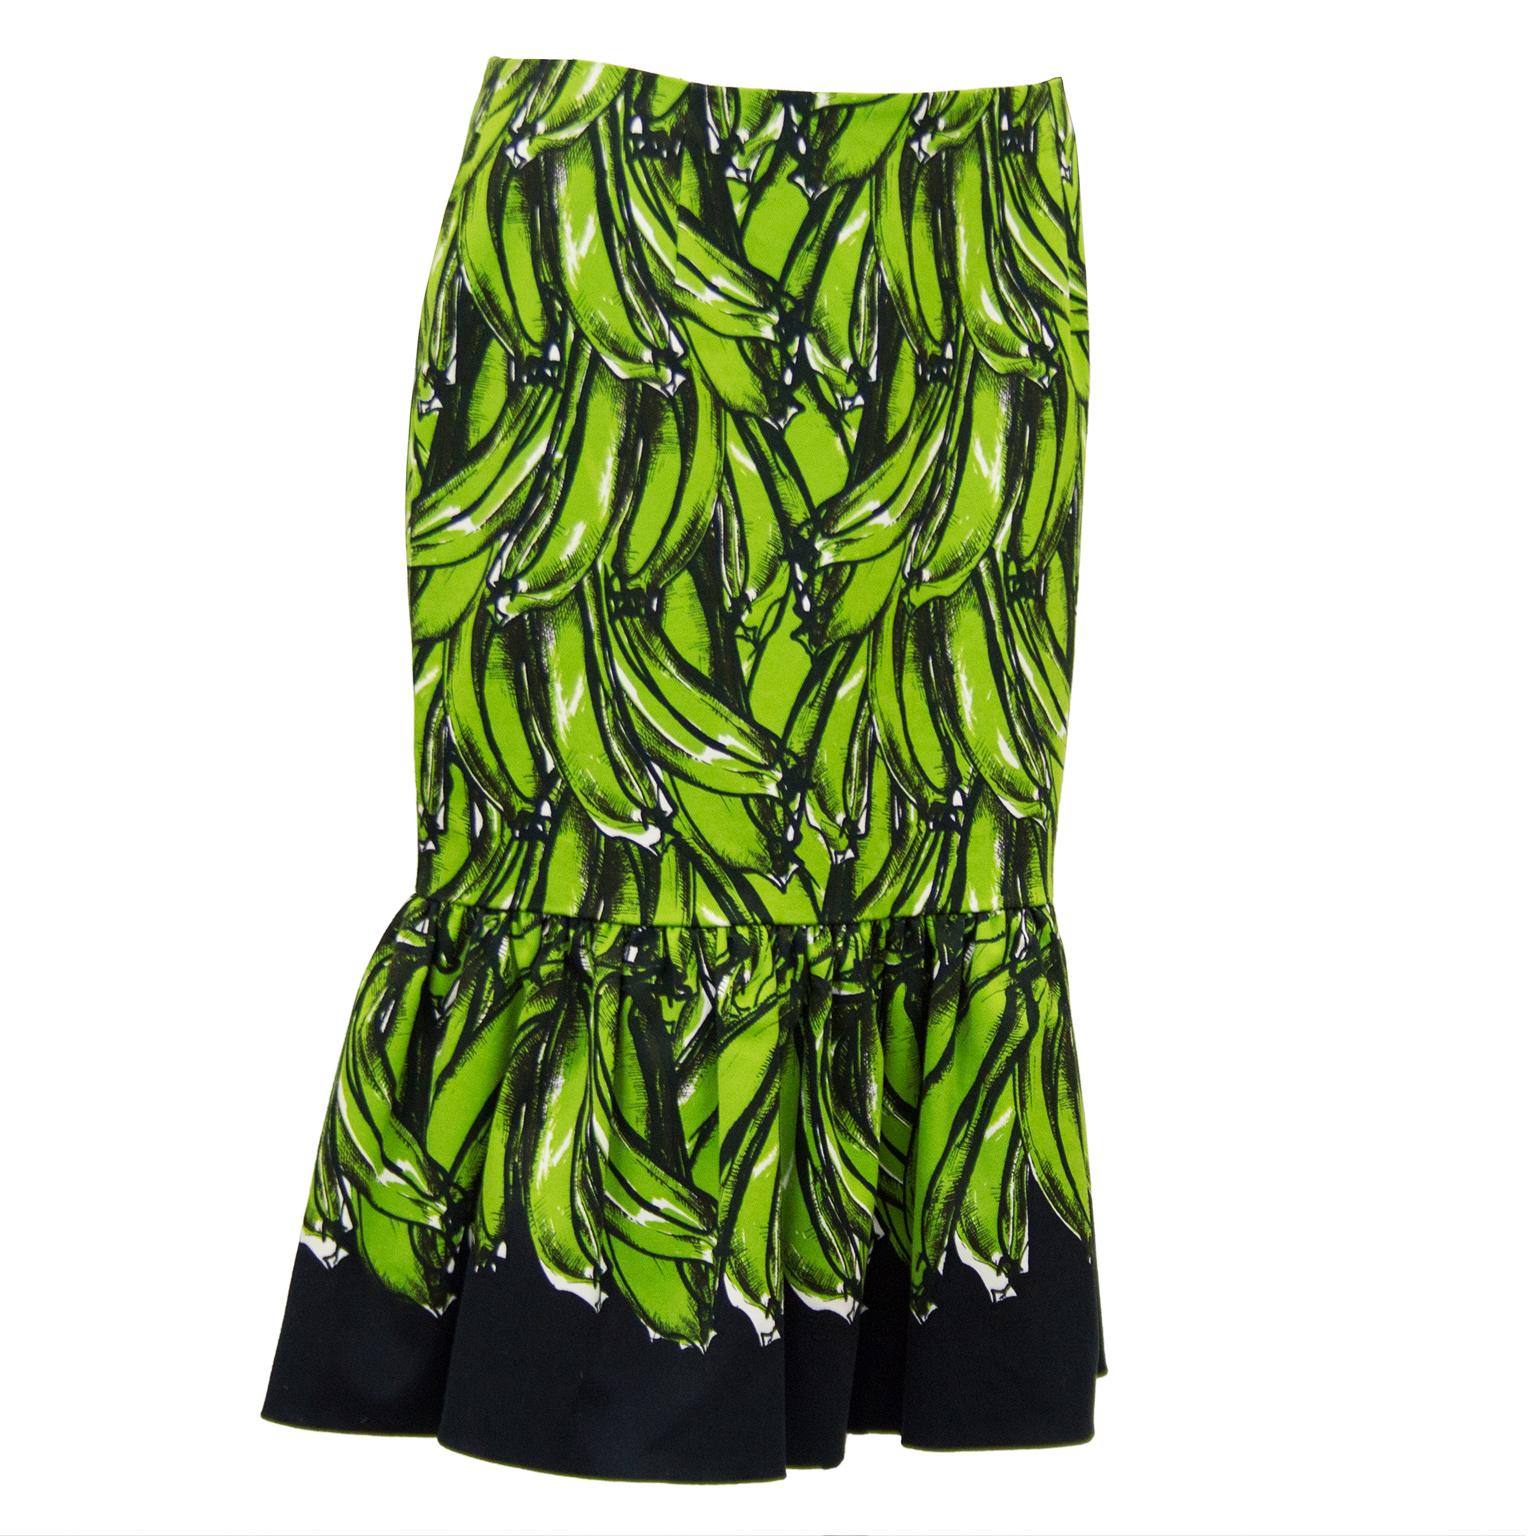 Featured on the runway for the Prada 2011 Spring RTW show and on the pages of fashion magazines and waists of the fashion elite, this cotton fluted pencil skirt is a iconic piece of fashion. Features an all over print of green bananas on a black